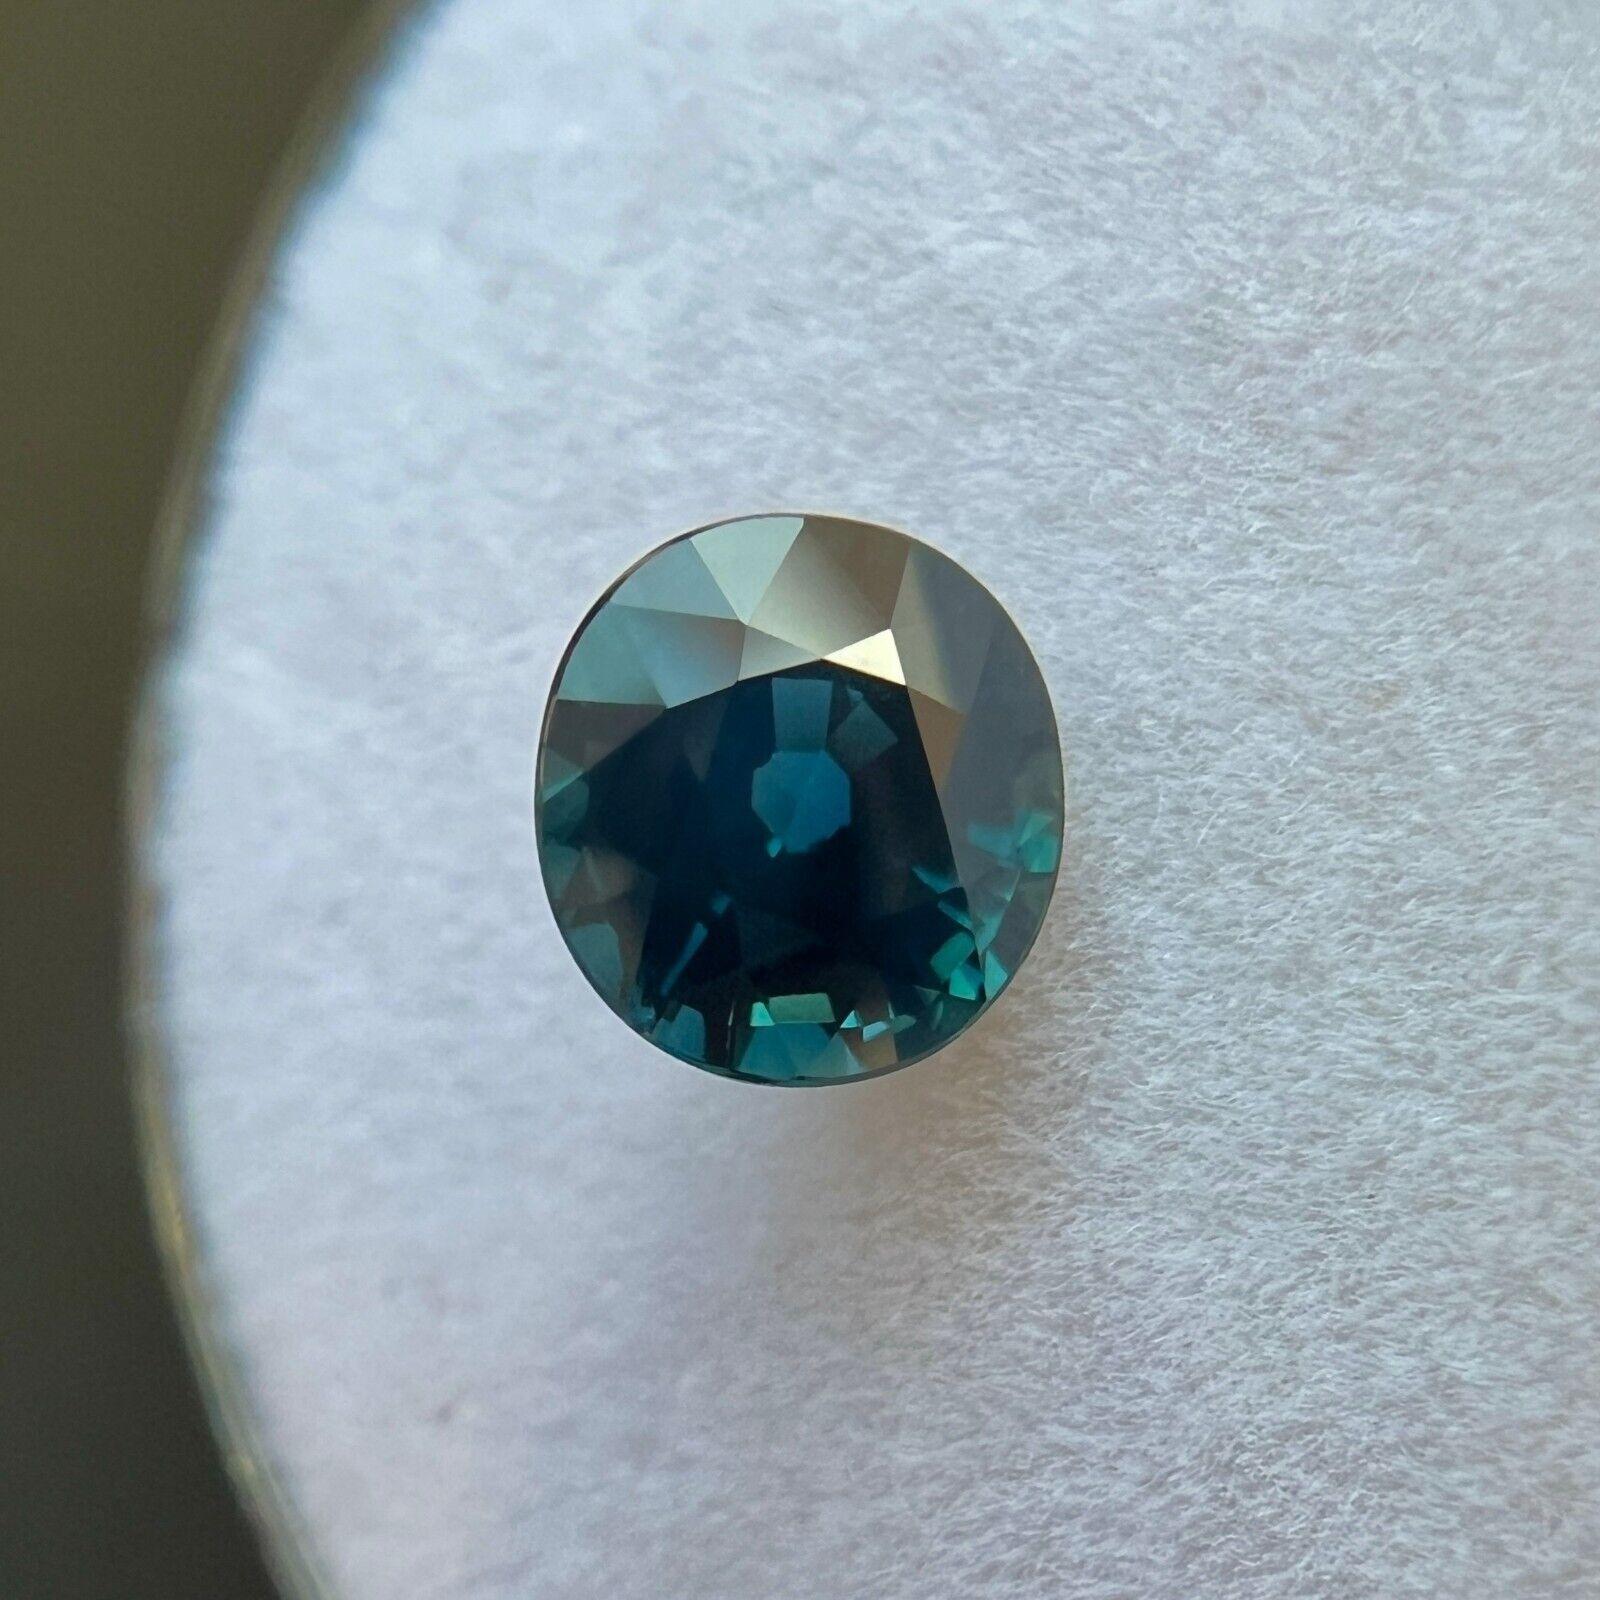 Taille ronde IGI Certified 1.11Ct Natural Teal Blue Sapphire Untreated Unheated Rare Gem en vente